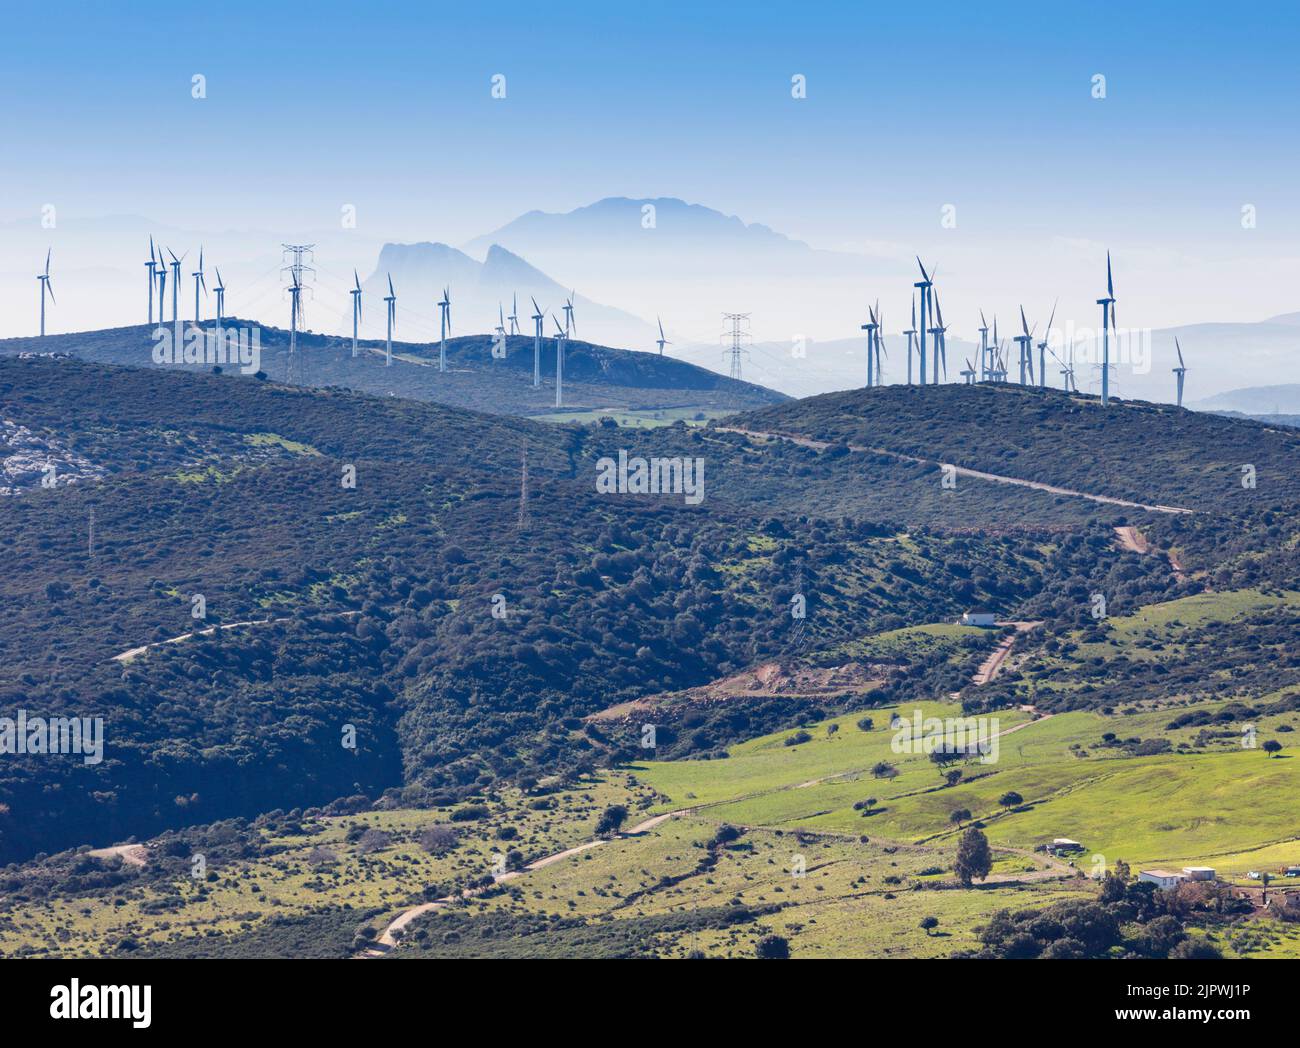 The Pillars of Hercules.  Windmills, Gibraltar and Morocco in Africa seen from Casares, Malaga Province, Andalusia, southern Spain. Gibraltar is behin Stock Photo